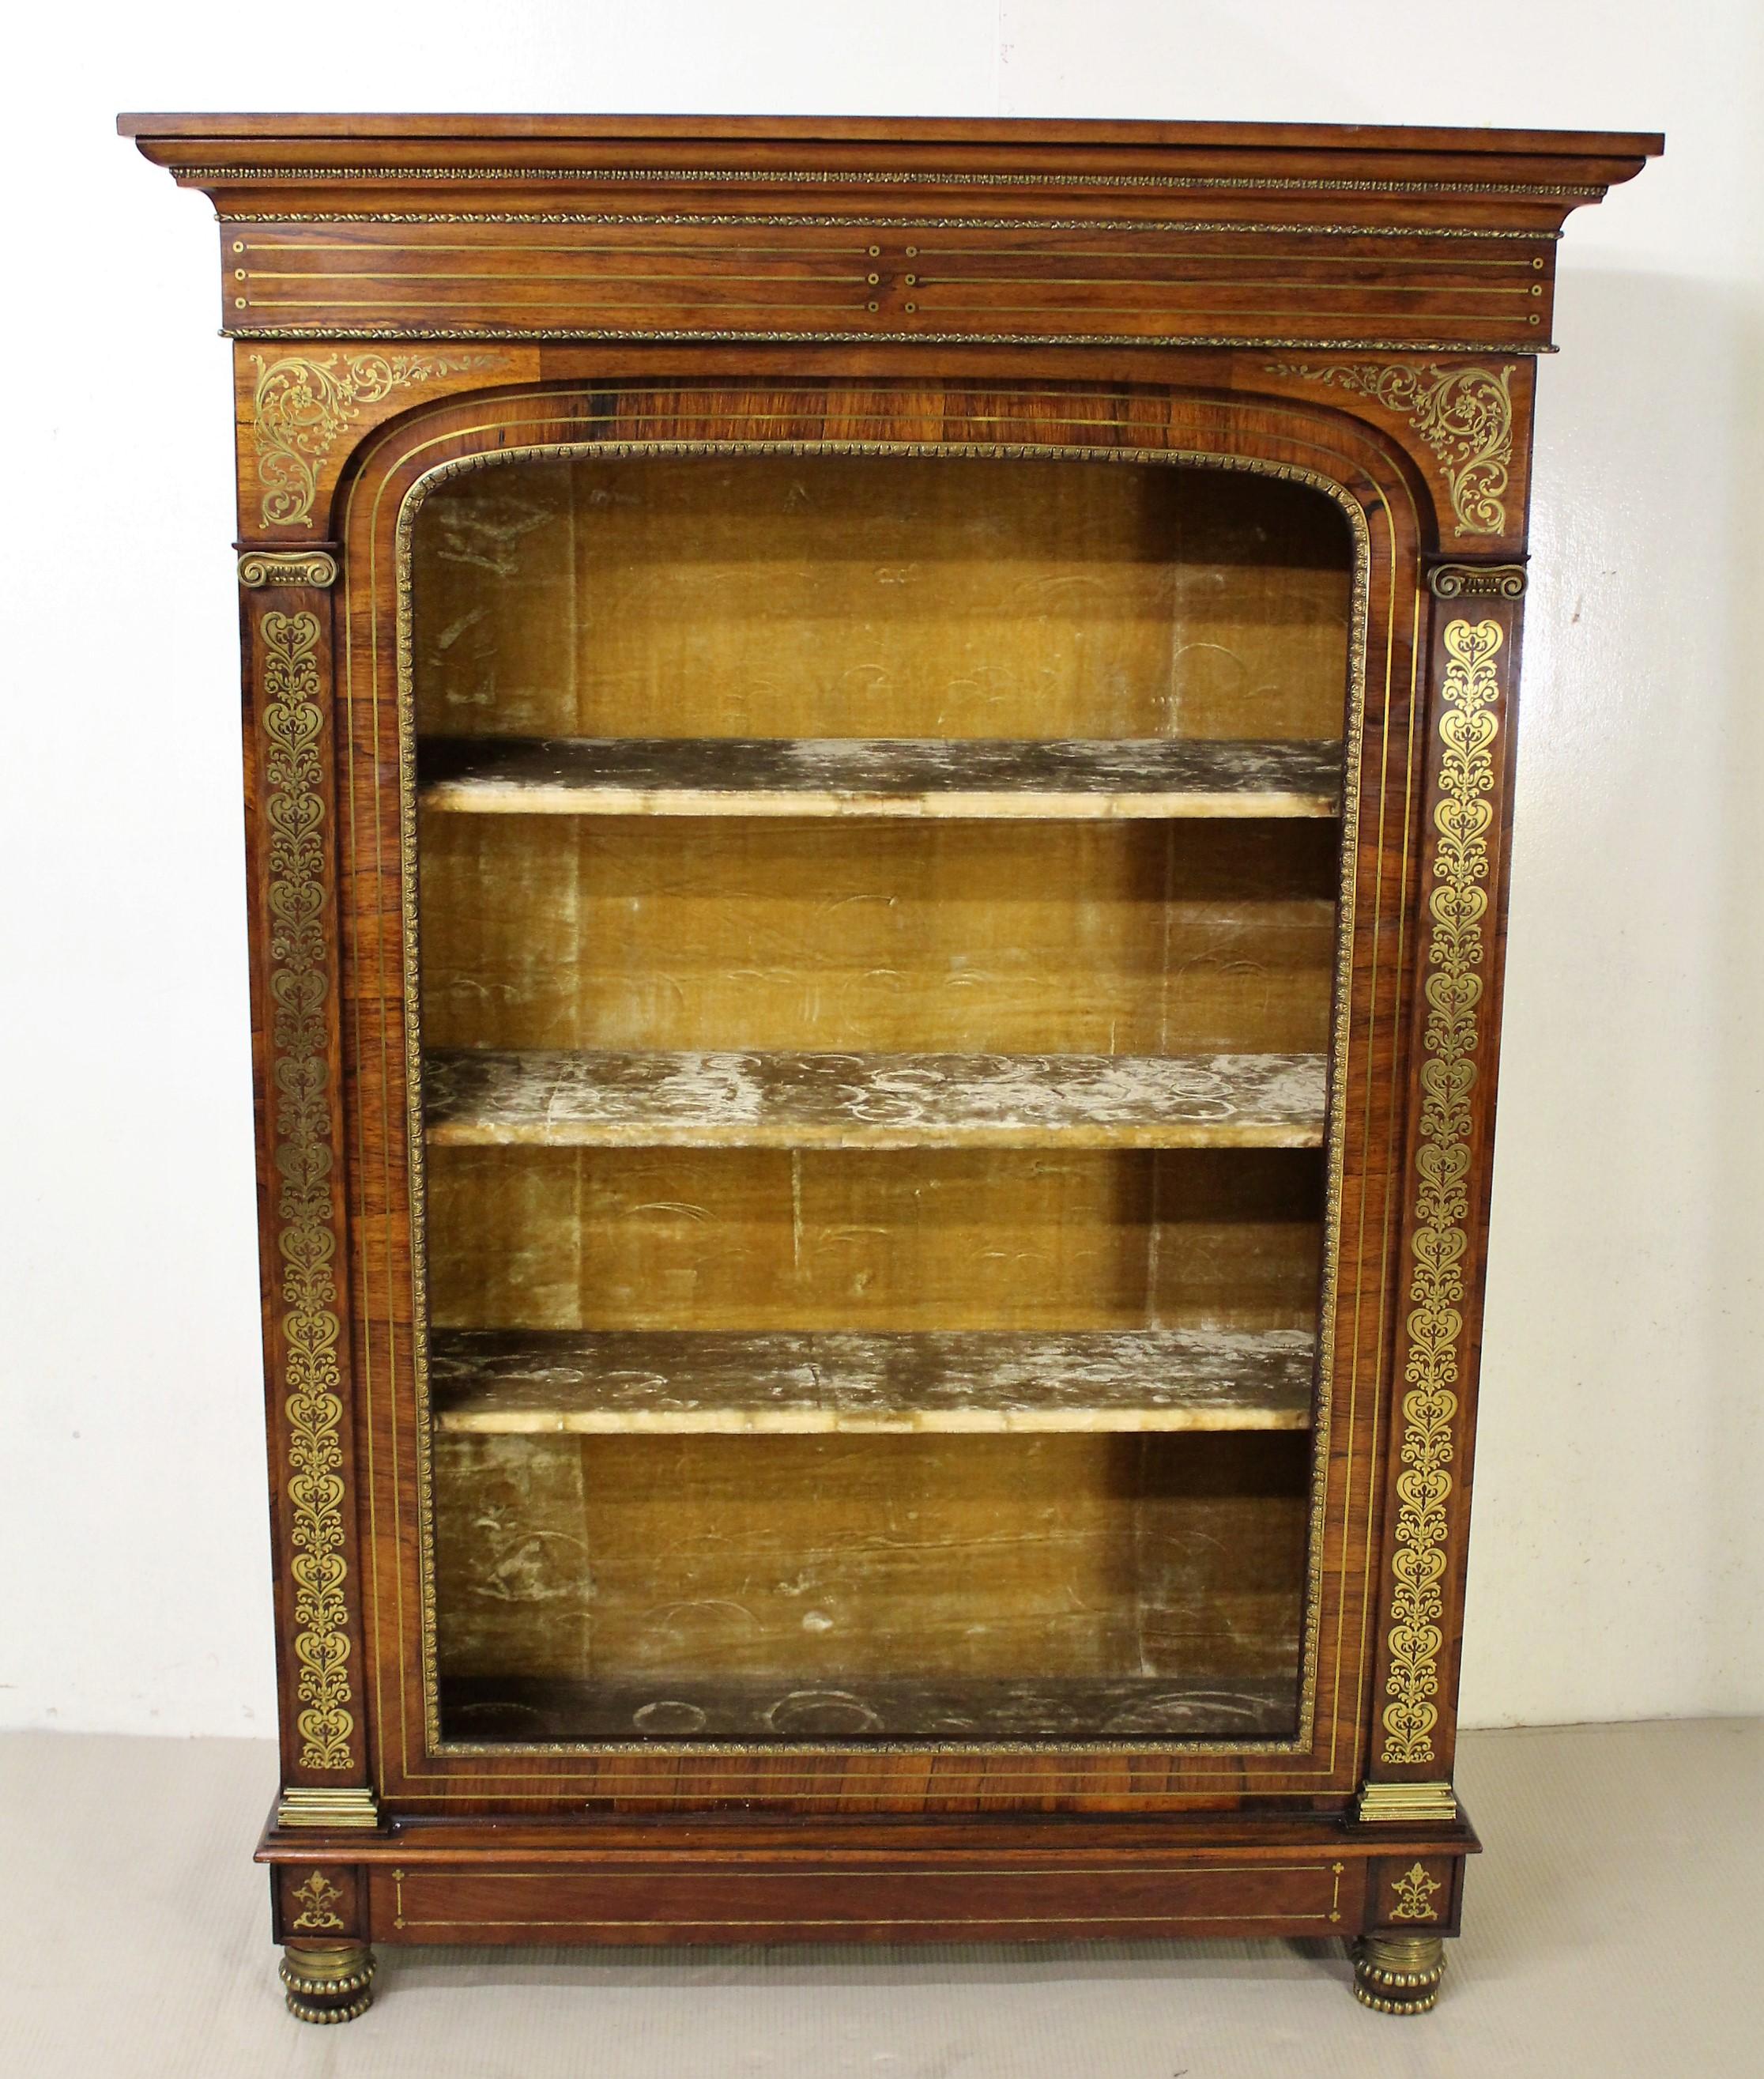 A superb Regency period brass inlaid rosewood open bookcase of generous proportions. Of fine construction in solid rosewood with attractive rosewood veneers onto a mahogany carcass. Decorated with intricate brass inlaid detailing throughout. The